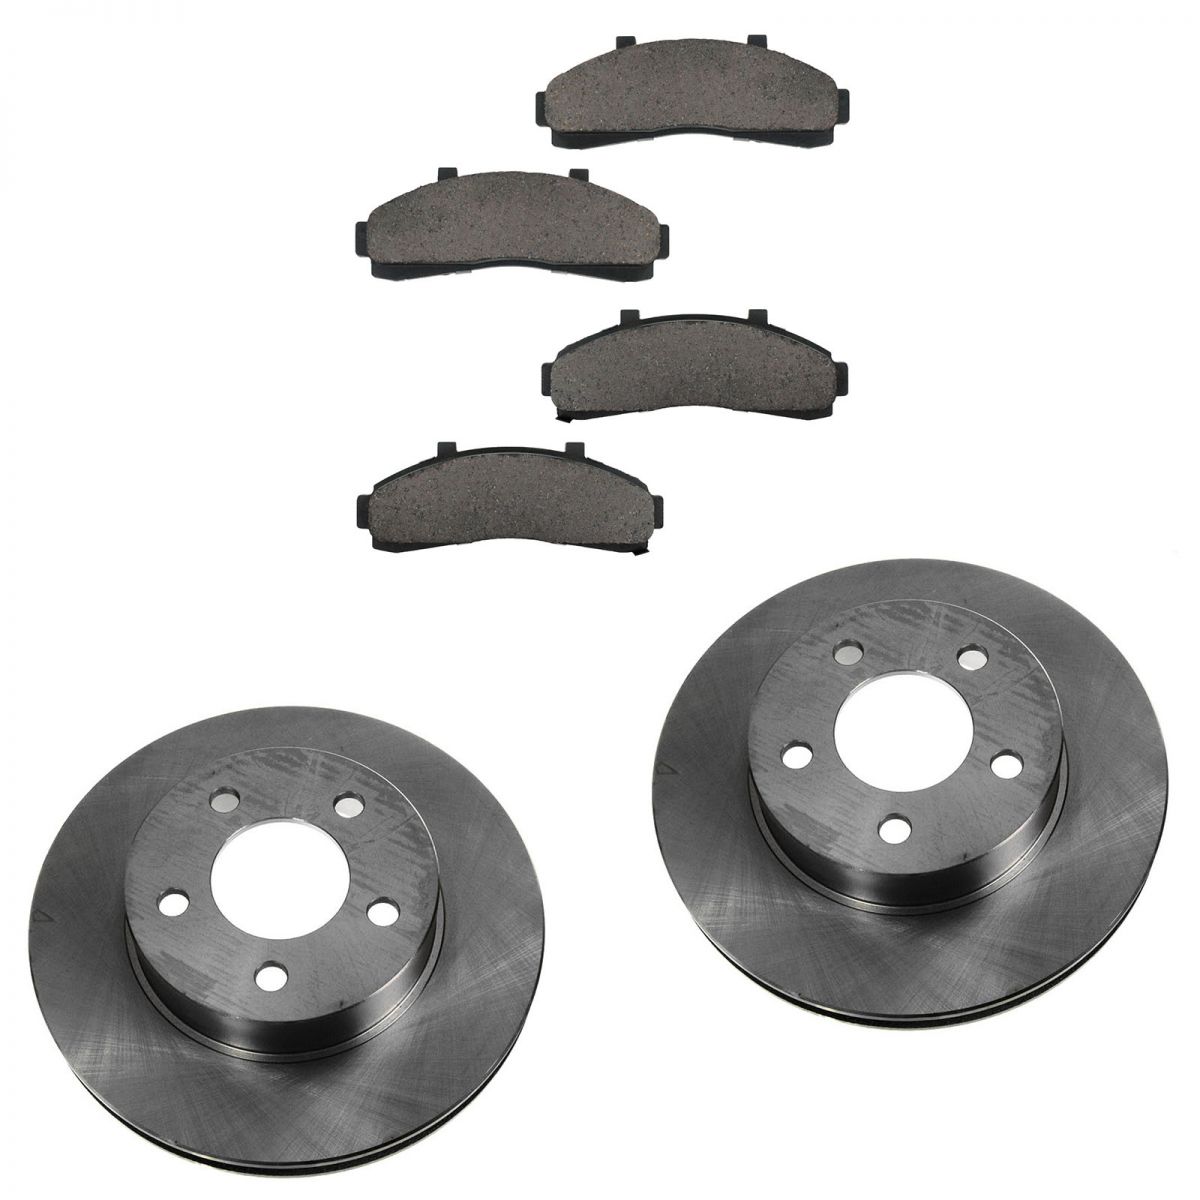 Price of new brake pads for 2001 ford explorer sport #8